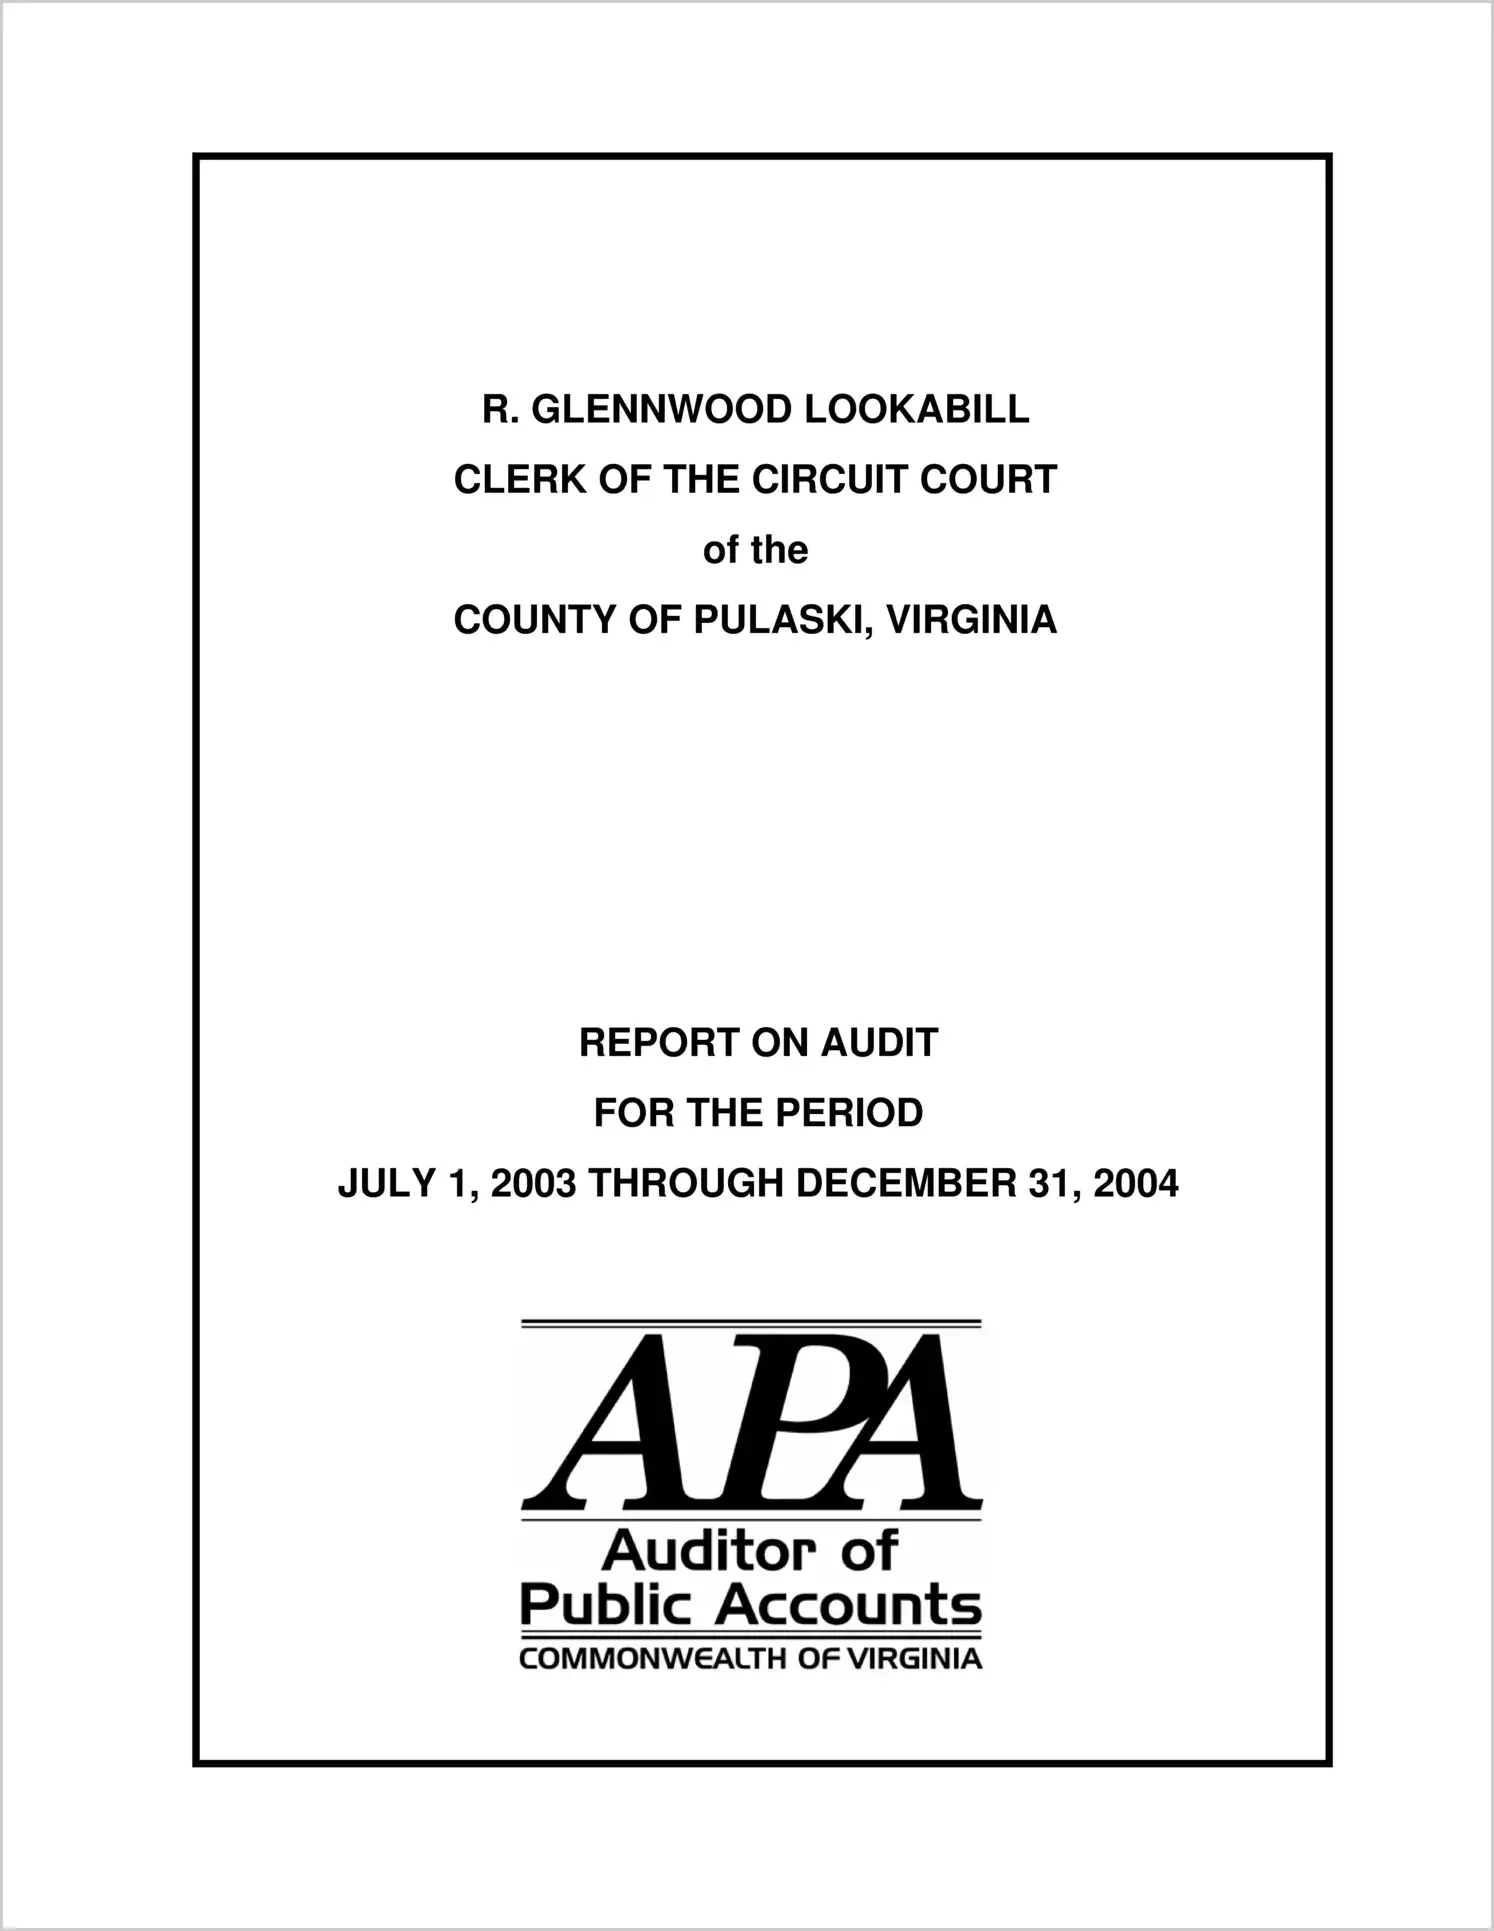 Clerk of the Circuit Court of the County of Pulaski for the period July 1, 2003 through December 31, 2004